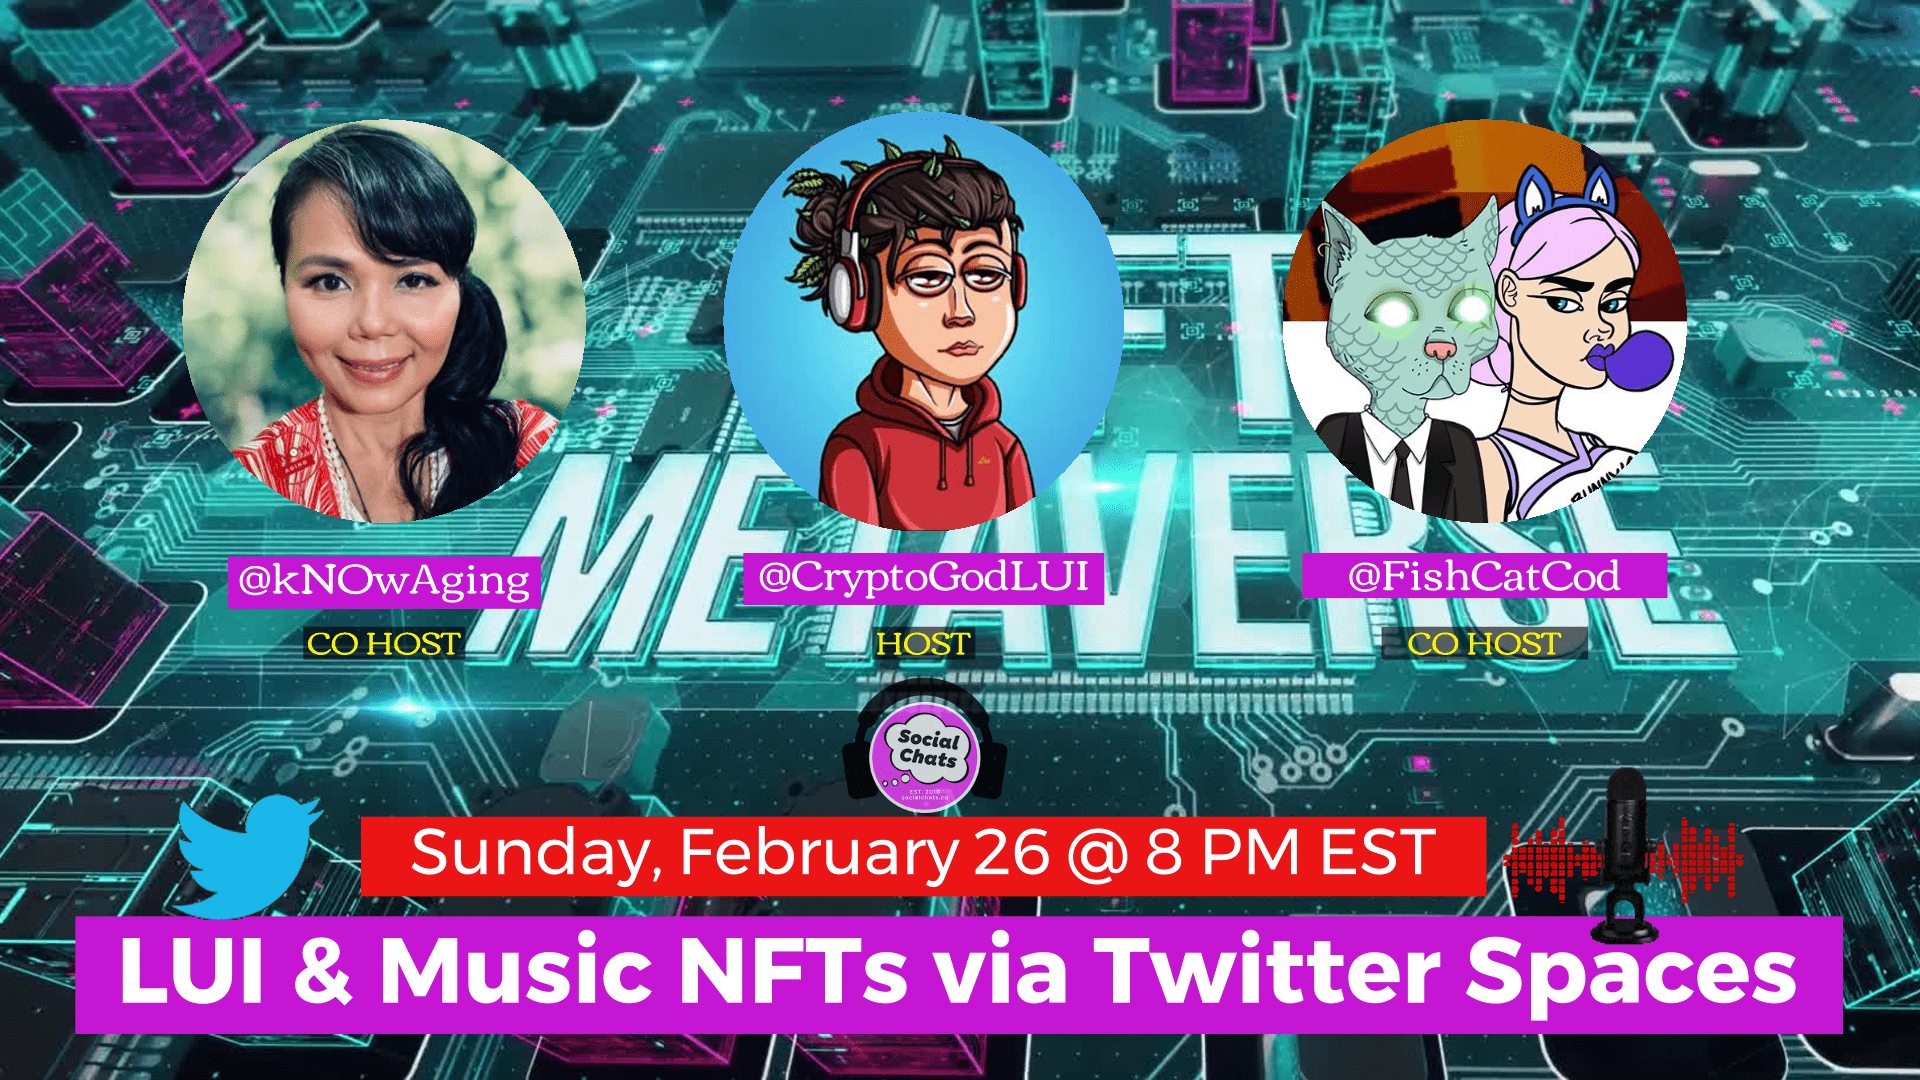 Join Host, @Cryptogodlui, and Co-Hosts @knowaging & @FishCatCod for LUI & Music NFTs via Twitter Spaces. Sunday, Feb. 26 @ 8 PM EST Chatting about all things music NFTs, WEB3, & Metaverse! #OpenMic